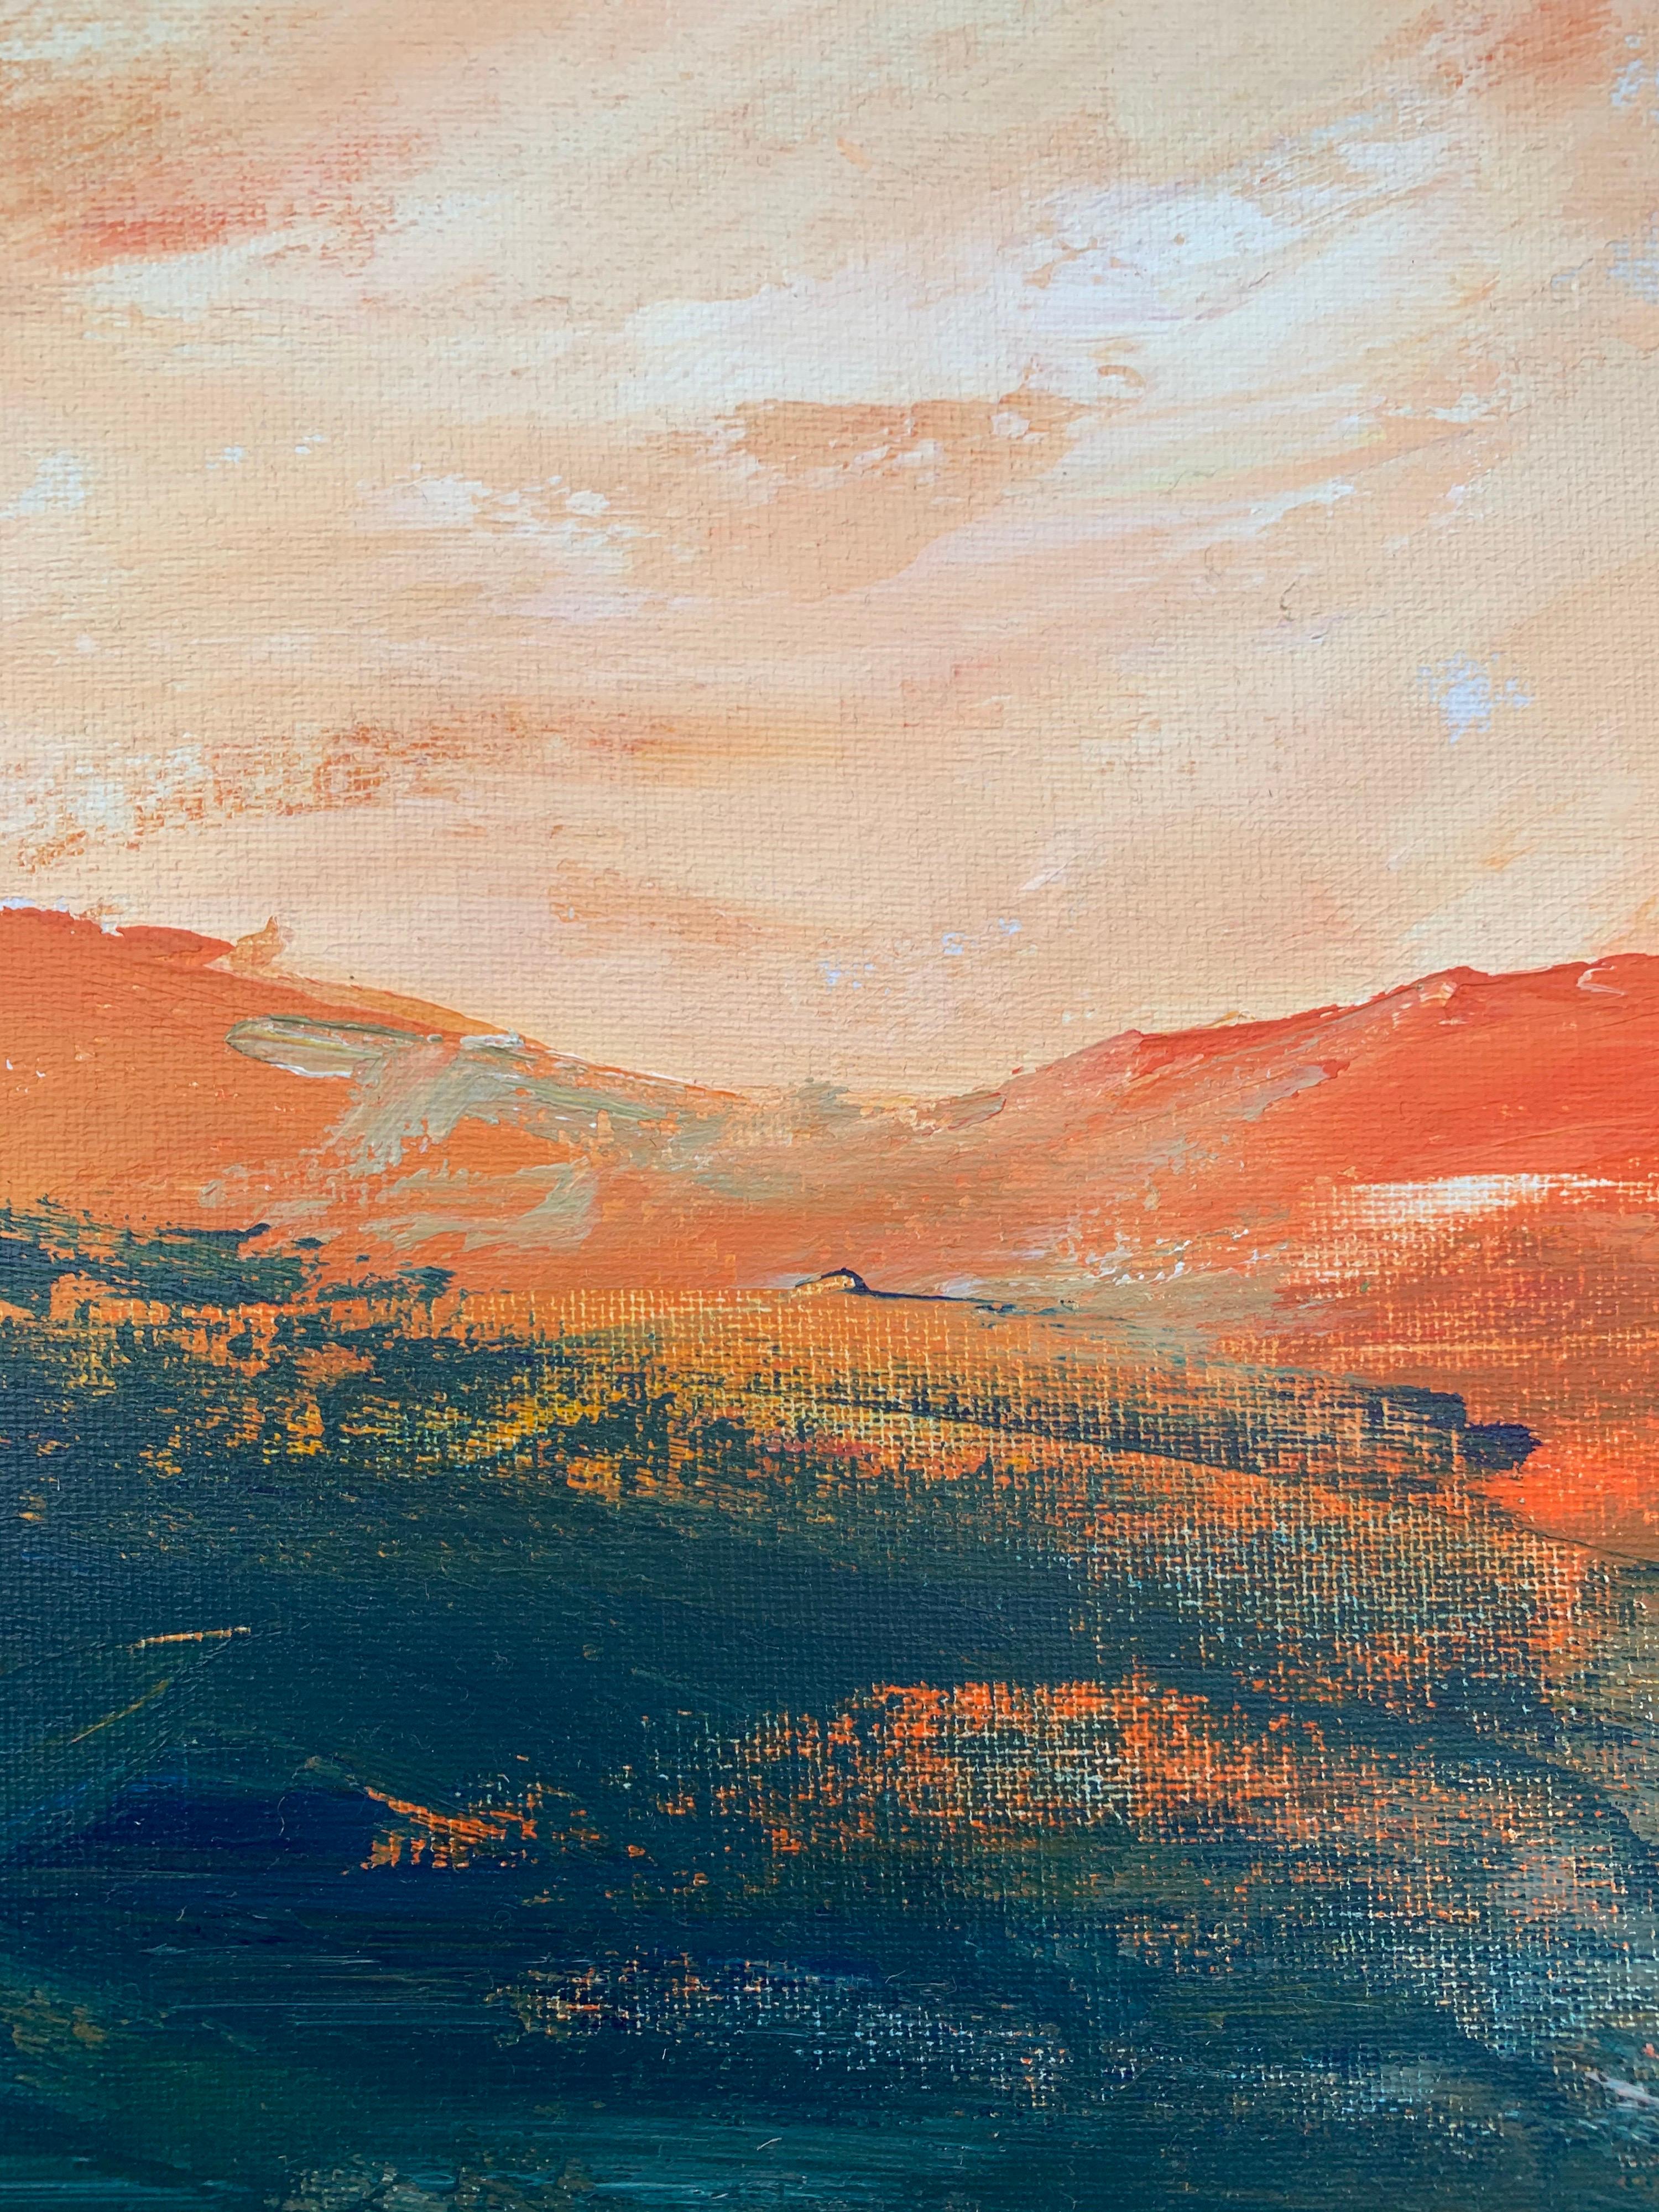 Abstract Orange & Black Mountain Landscape Study by Contemporary British Artist For Sale 4